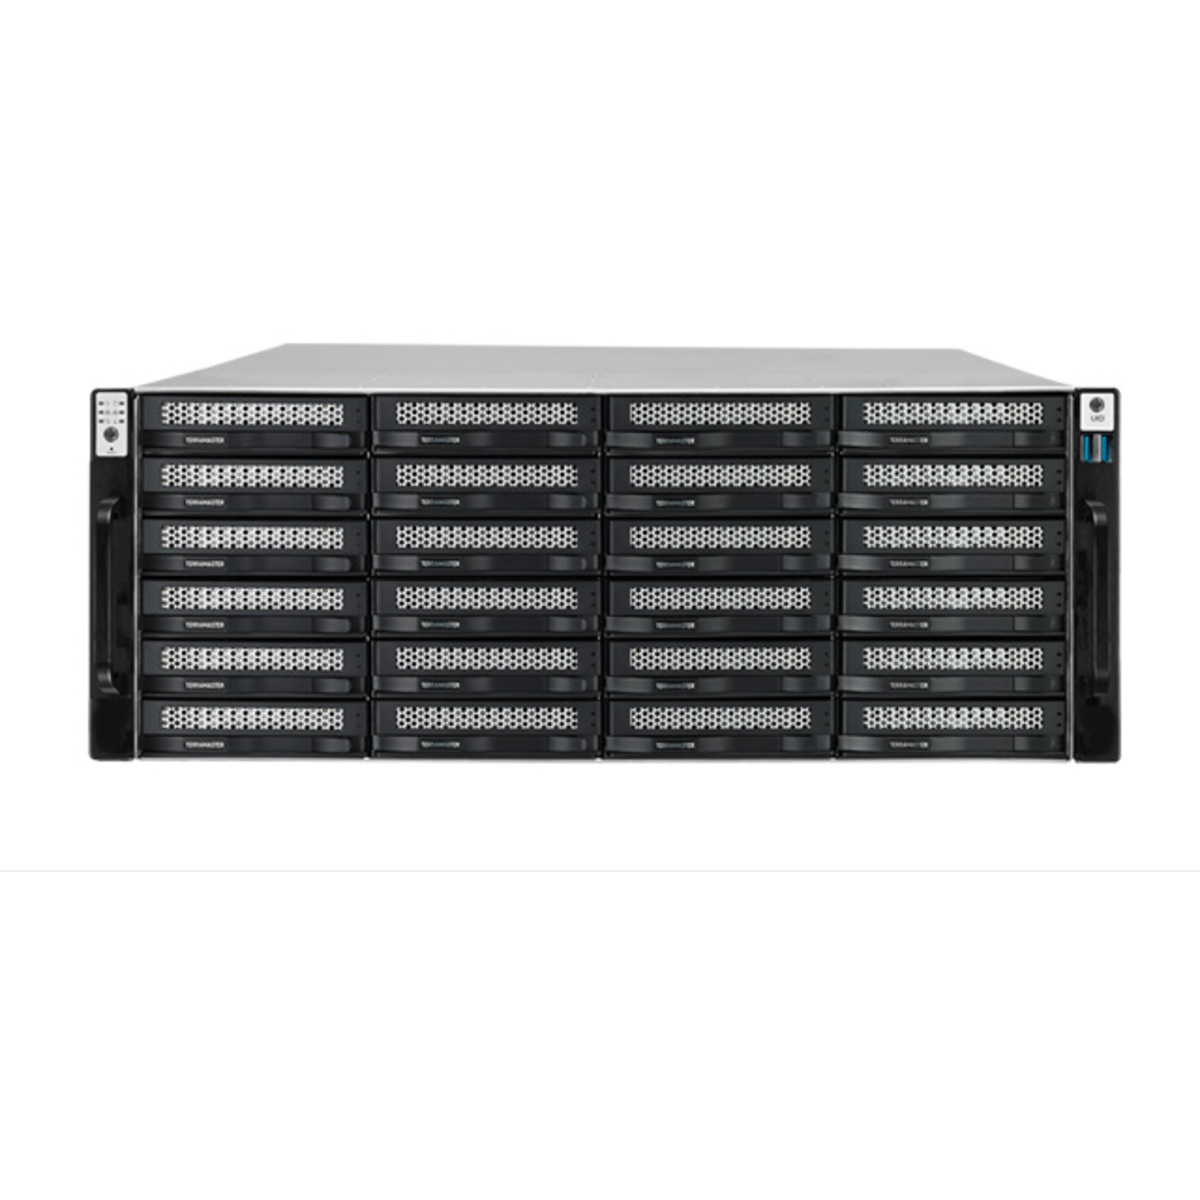 TerraMaster U24-722-2224 160tb 24-Bay RackMount Large Business / Enterprise NAS - Network Attached Storage Device 20x8tb Western Digital Red Pro WD8005FFBX 3.5 7200rpm SATA 6Gb/s HDD NAS Class Drives Installed - Burn-In Tested U24-722-2224